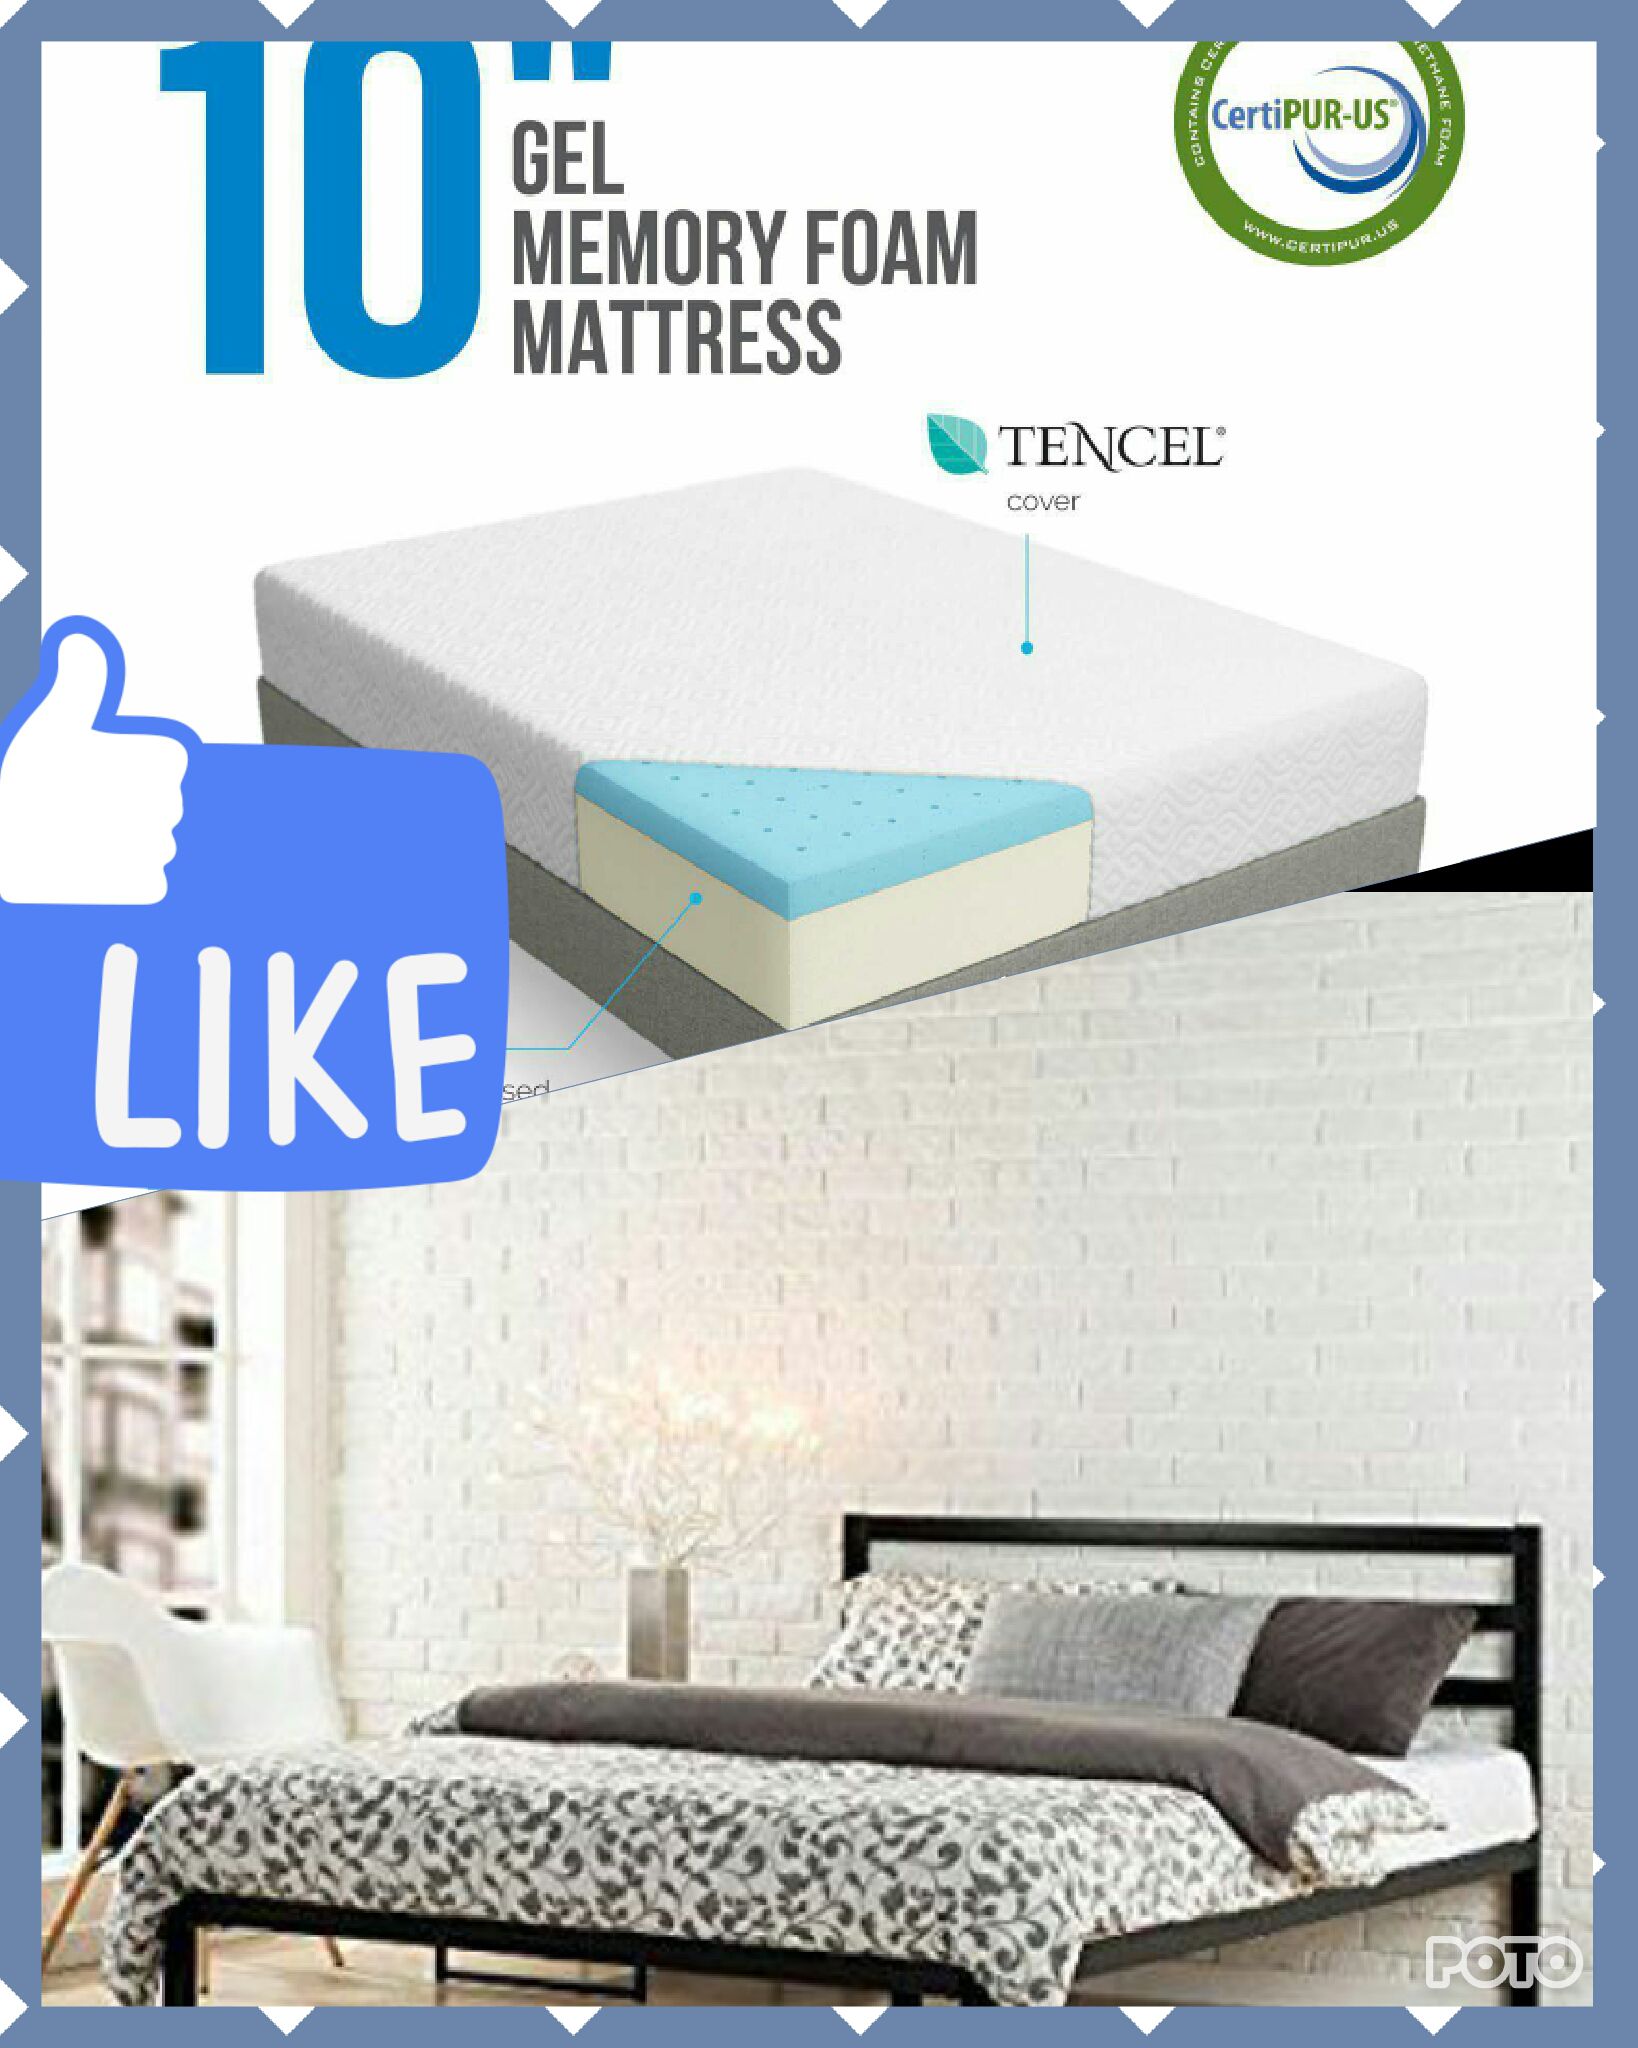 Queen 15" bed frame from Zinus with 10" lucid mattress